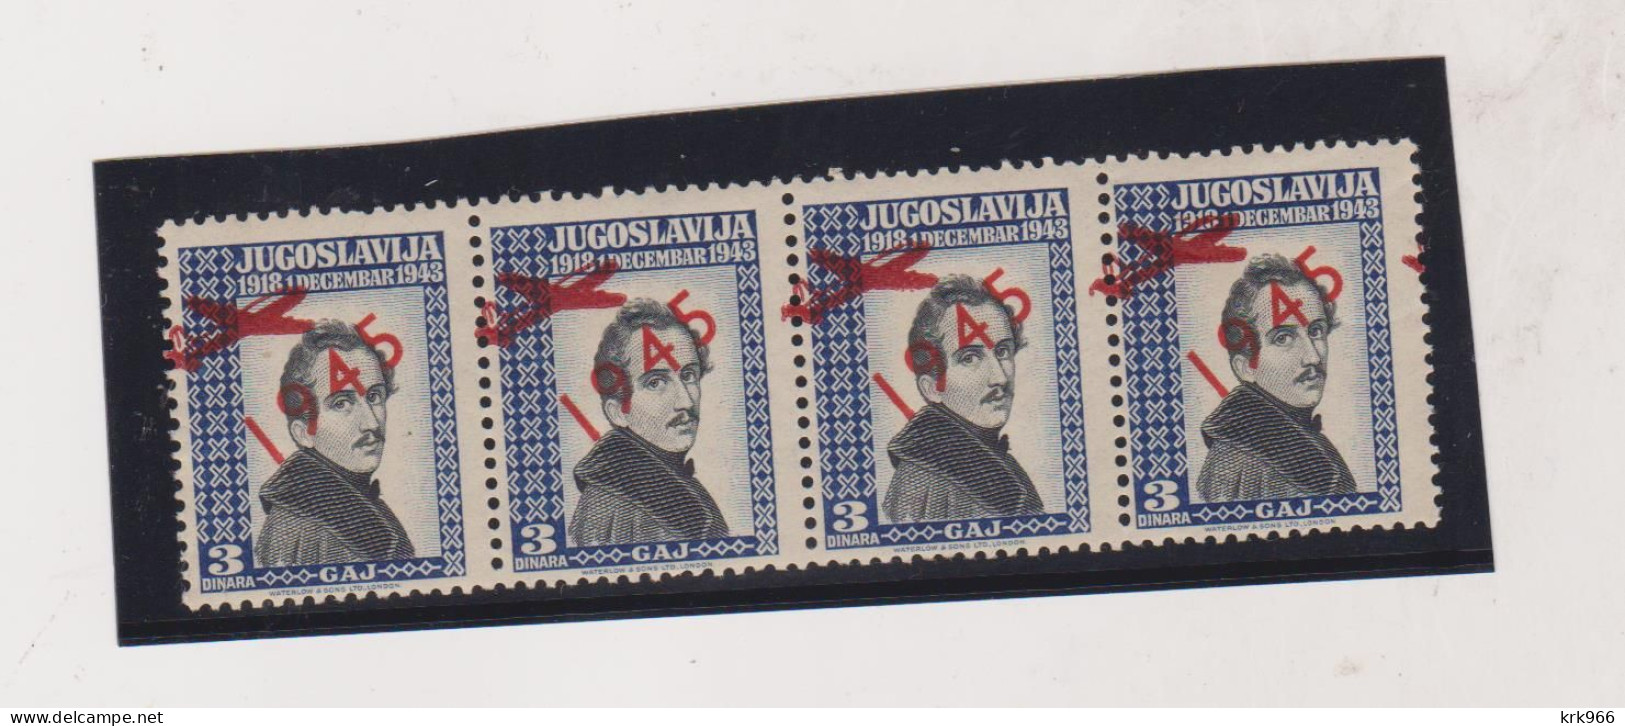 YUGOSLAVIA EXILE Nice Stamp 1945 + Plane Shifted  Ovpt Strip Of 4 MNH - Covers & Documents